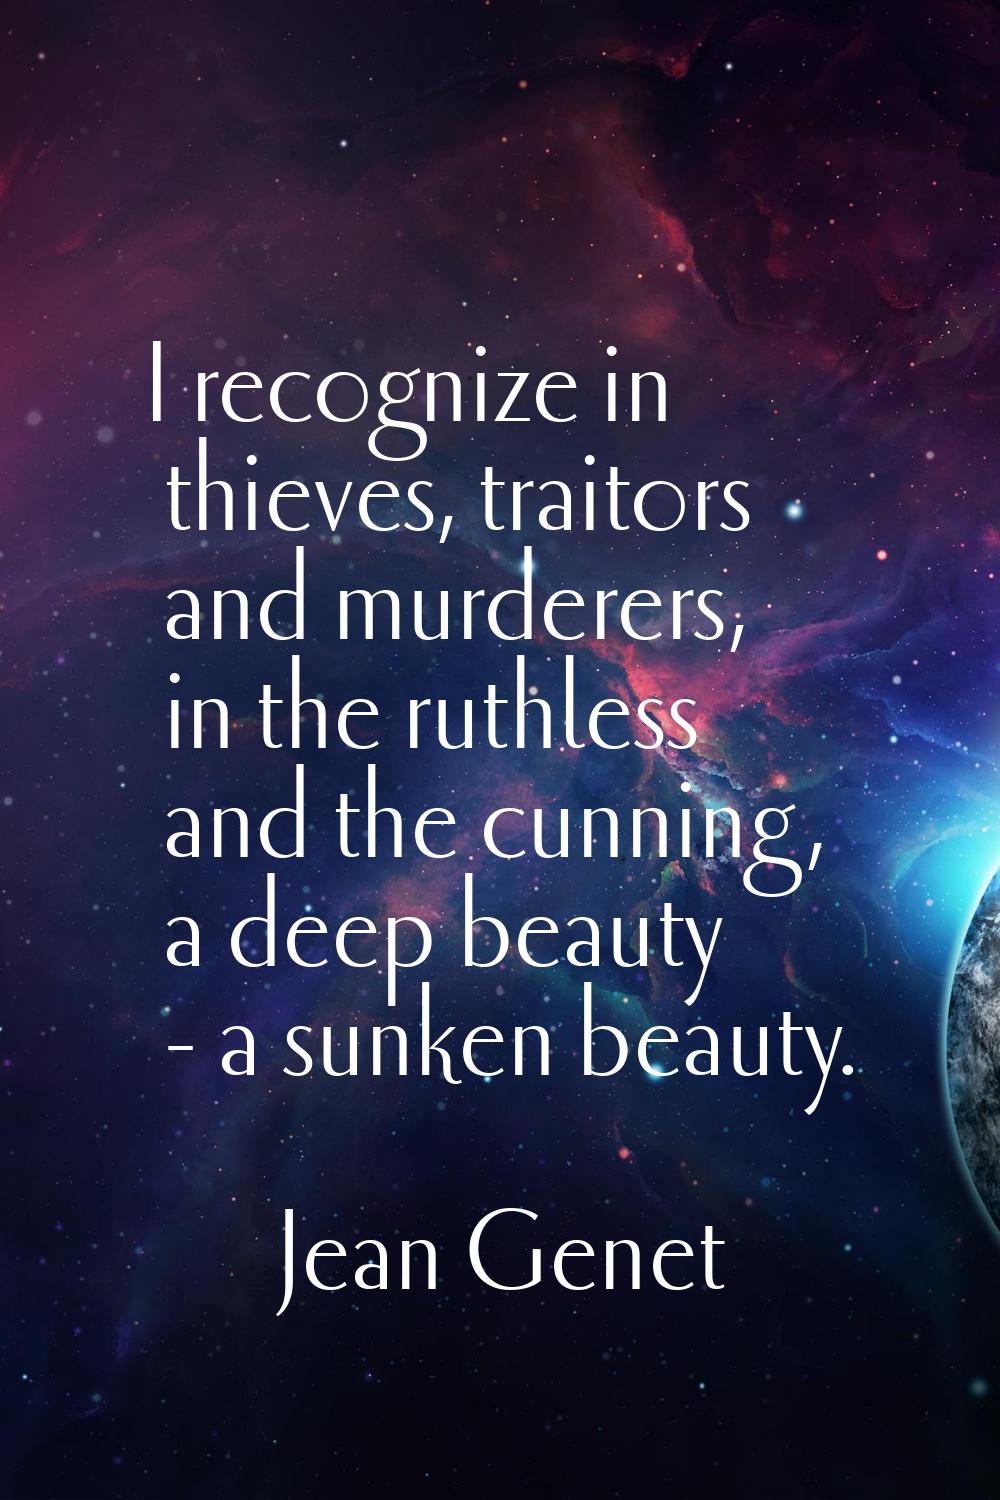 I recognize in thieves, traitors and murderers, in the ruthless and the cunning, a deep beauty - a 